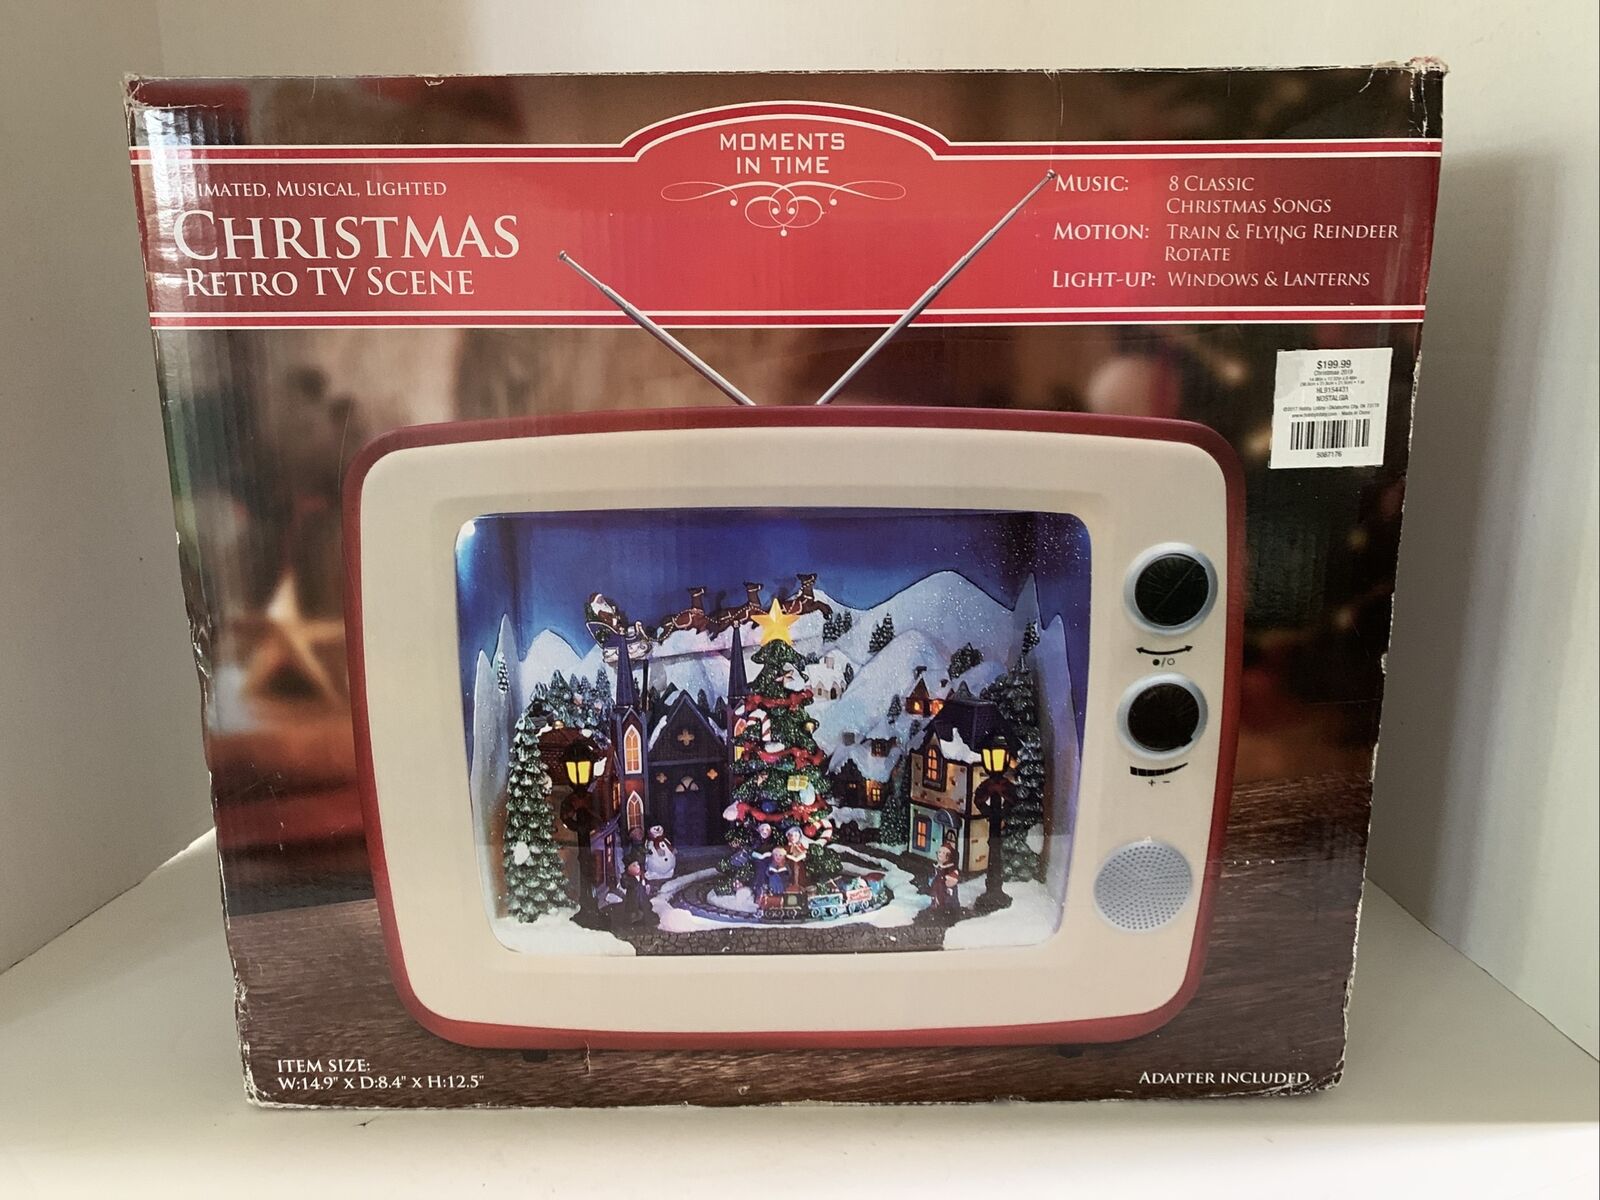 Animated, Musical, Lighted Christmas Retro TV Scene “Moments In Time” TV Size